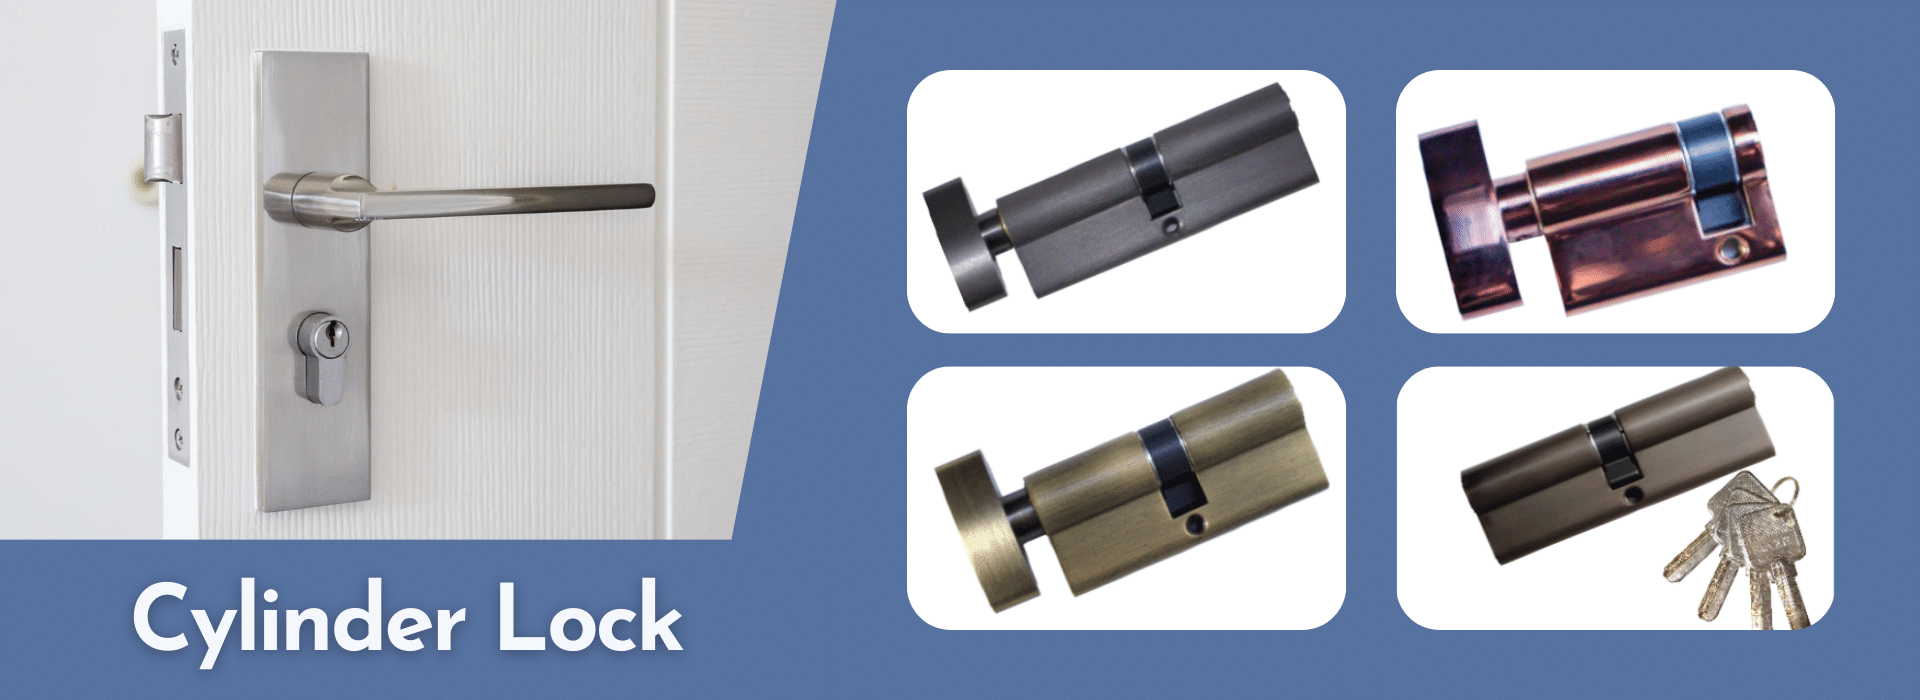 How to maintain and repair a cylinder lock